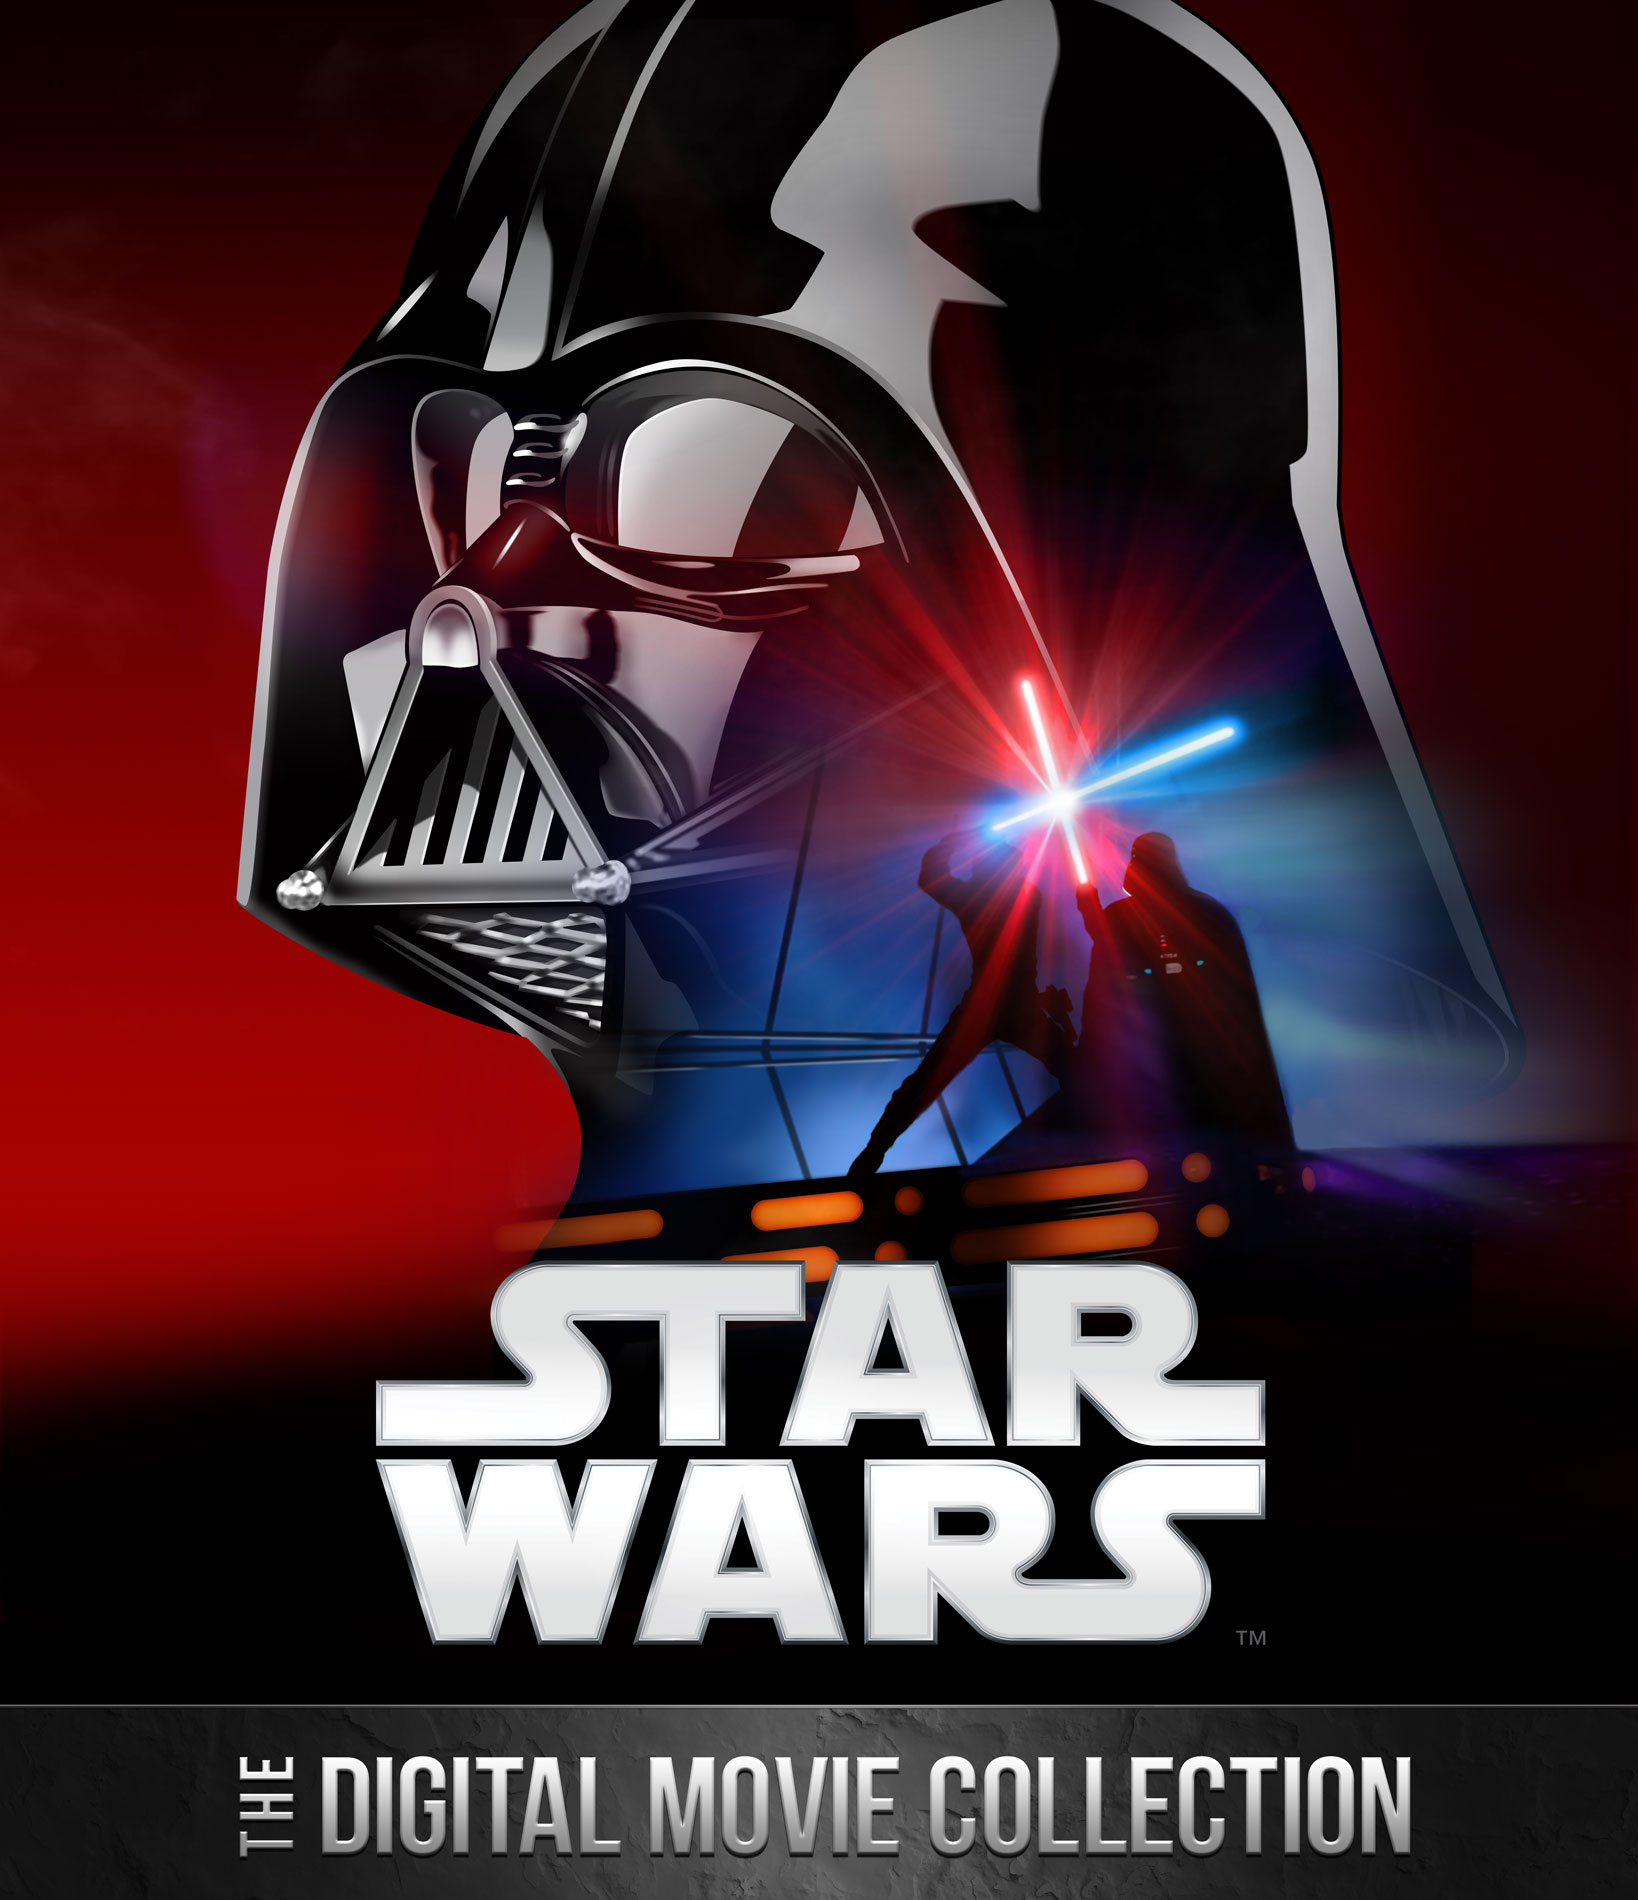 Star Wars: The Digital Movie Collection 